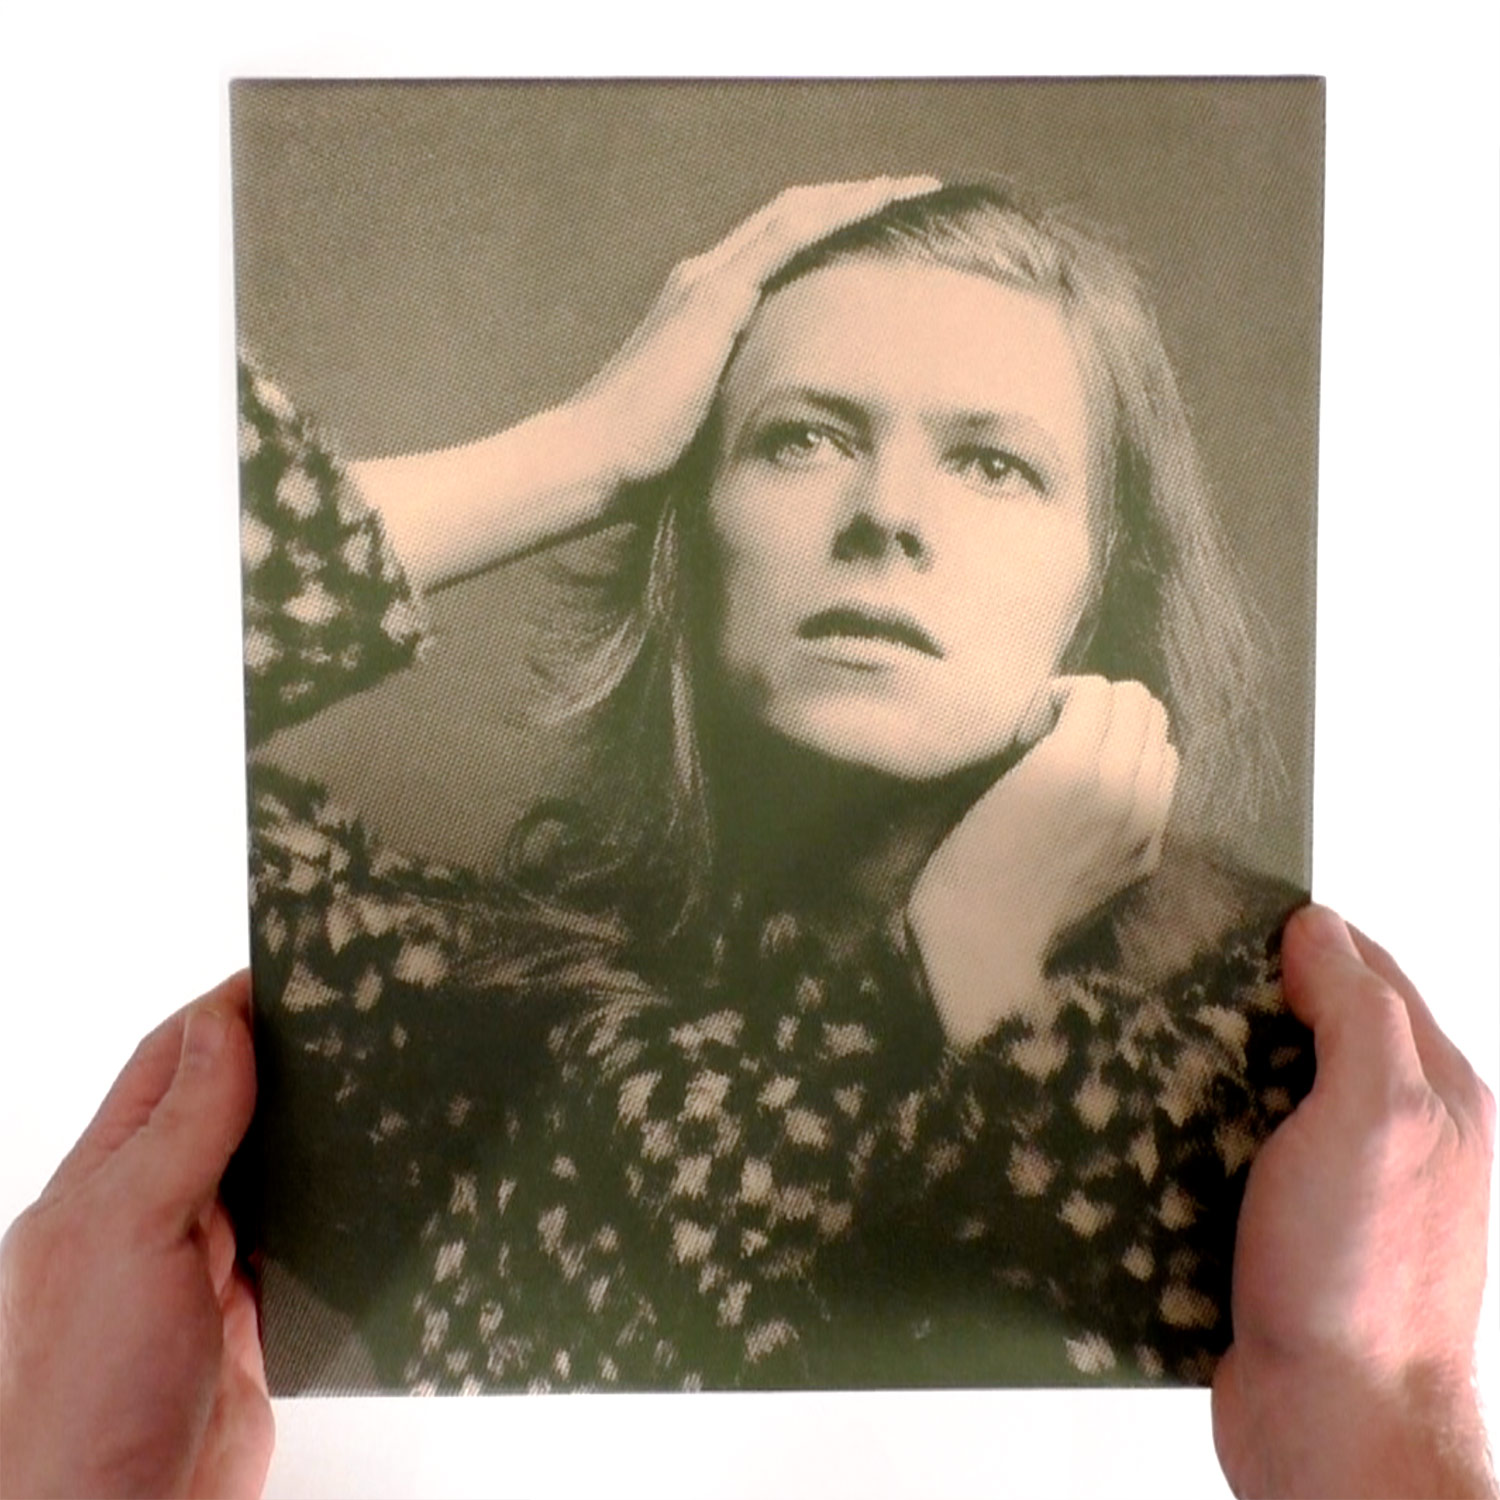 David Bowie / Divine Symmetry: The Journey to Hunky Dory - unboxing video